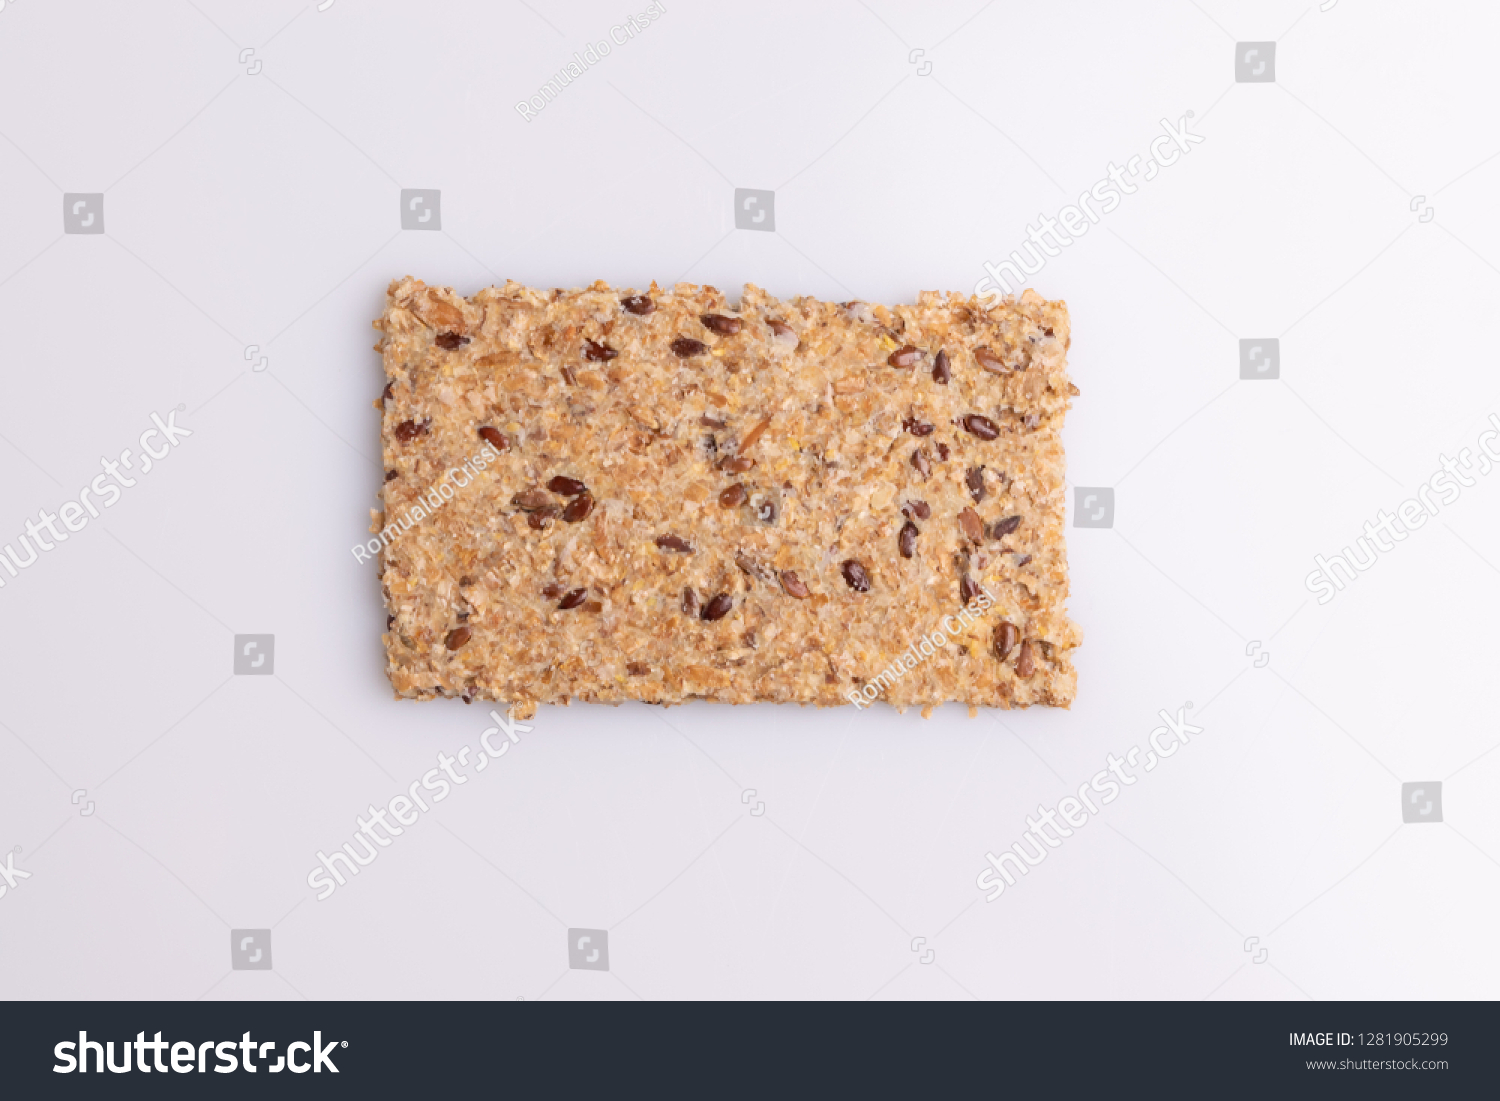 Diet flax seed whole grain cracker isolated on white background, soft light, top view, copy space #1281905299